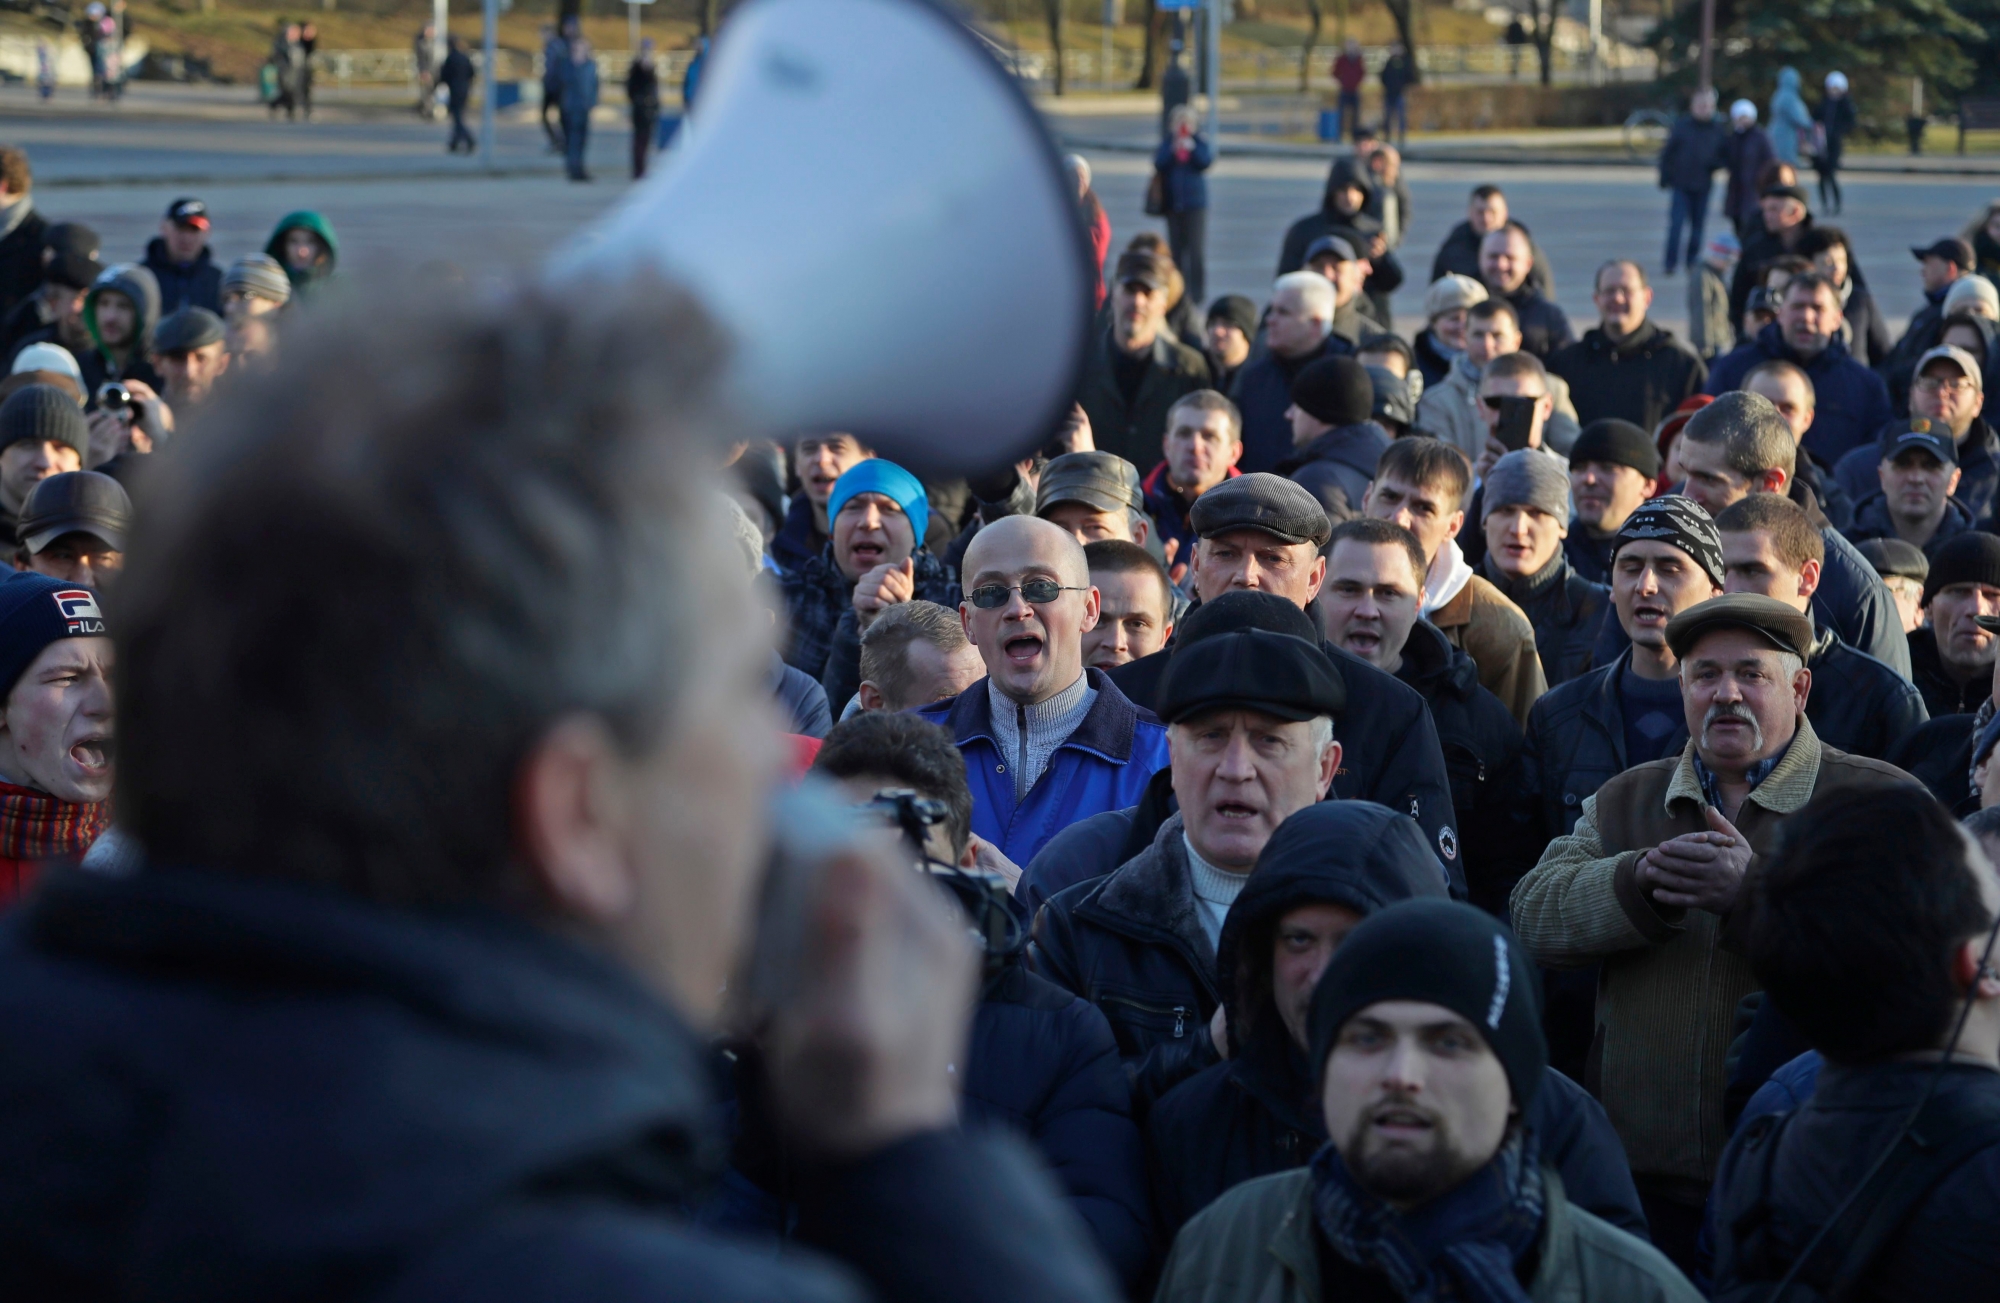 People shout slogans at a rally in the city of Maladzyechna, Belarus, Friday, March 10, 2017. The Friday demonstration came a day after President Alexander Lukashenko suspended the collection of fines from unemployed people. The two-year-old law, which imposes penalties of $250 on people who are jobless for more than six months but do no register on state labor exchanges, has been the focus of a wave of demonstrations over the past month. The protesters in Maladzyechna demanded the law be entirely annulled, and called for the end of Lukashenko's 23-year-long rule. (AP Photo/Sergei Grits) BELARUS PROTEST